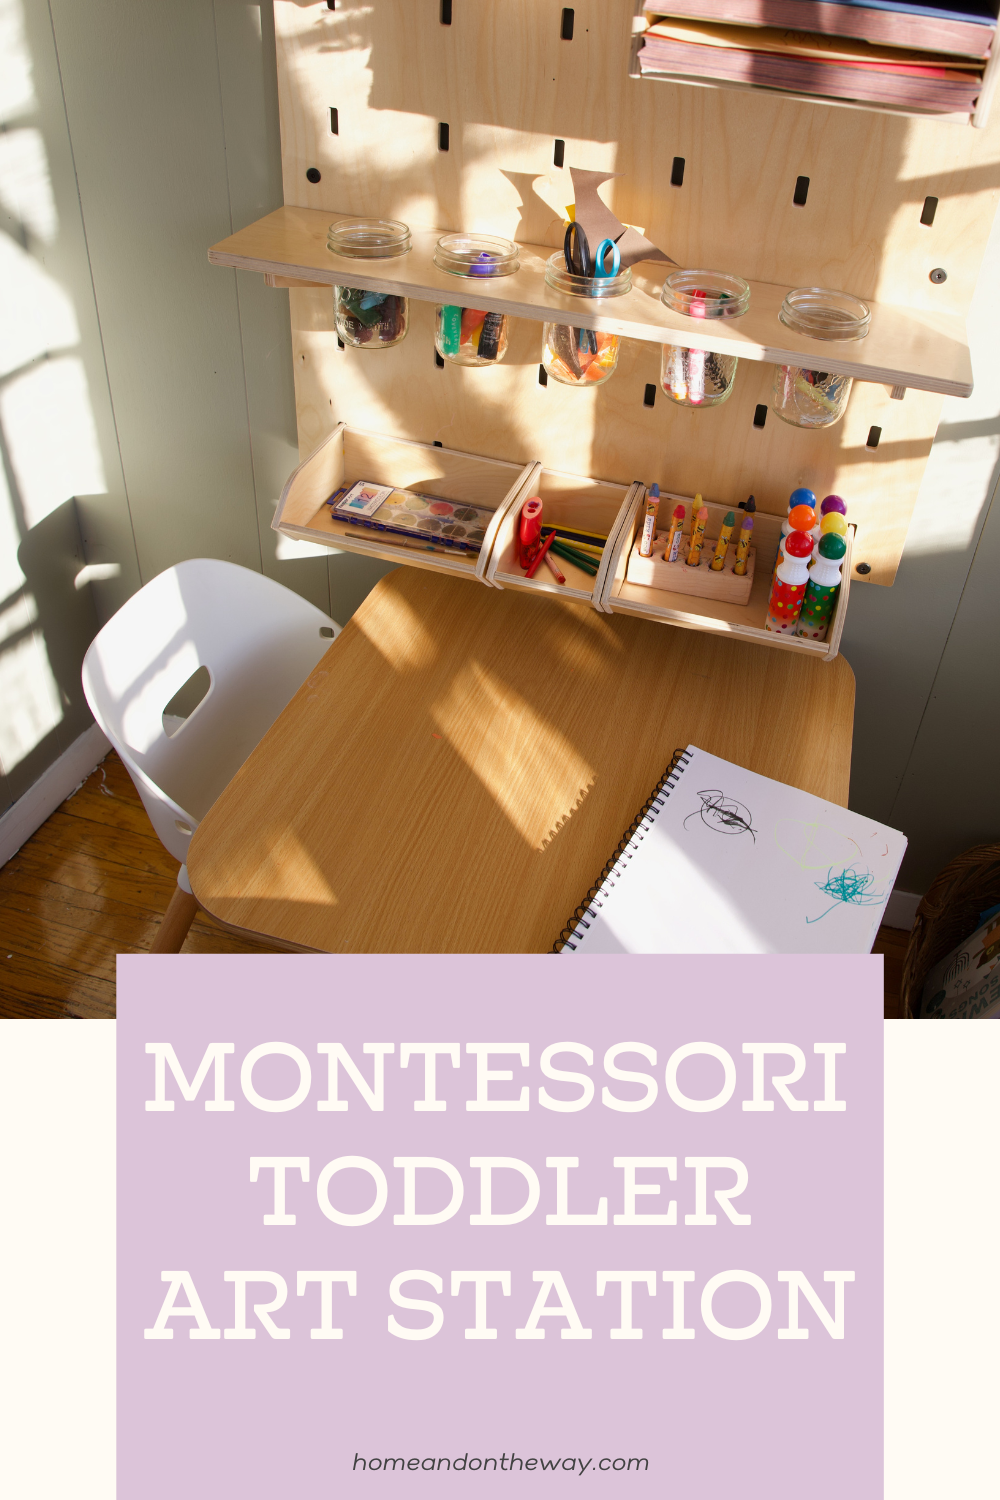 Our Art Station [Montessori Toddler Art Set-Up] — Home and on the Way